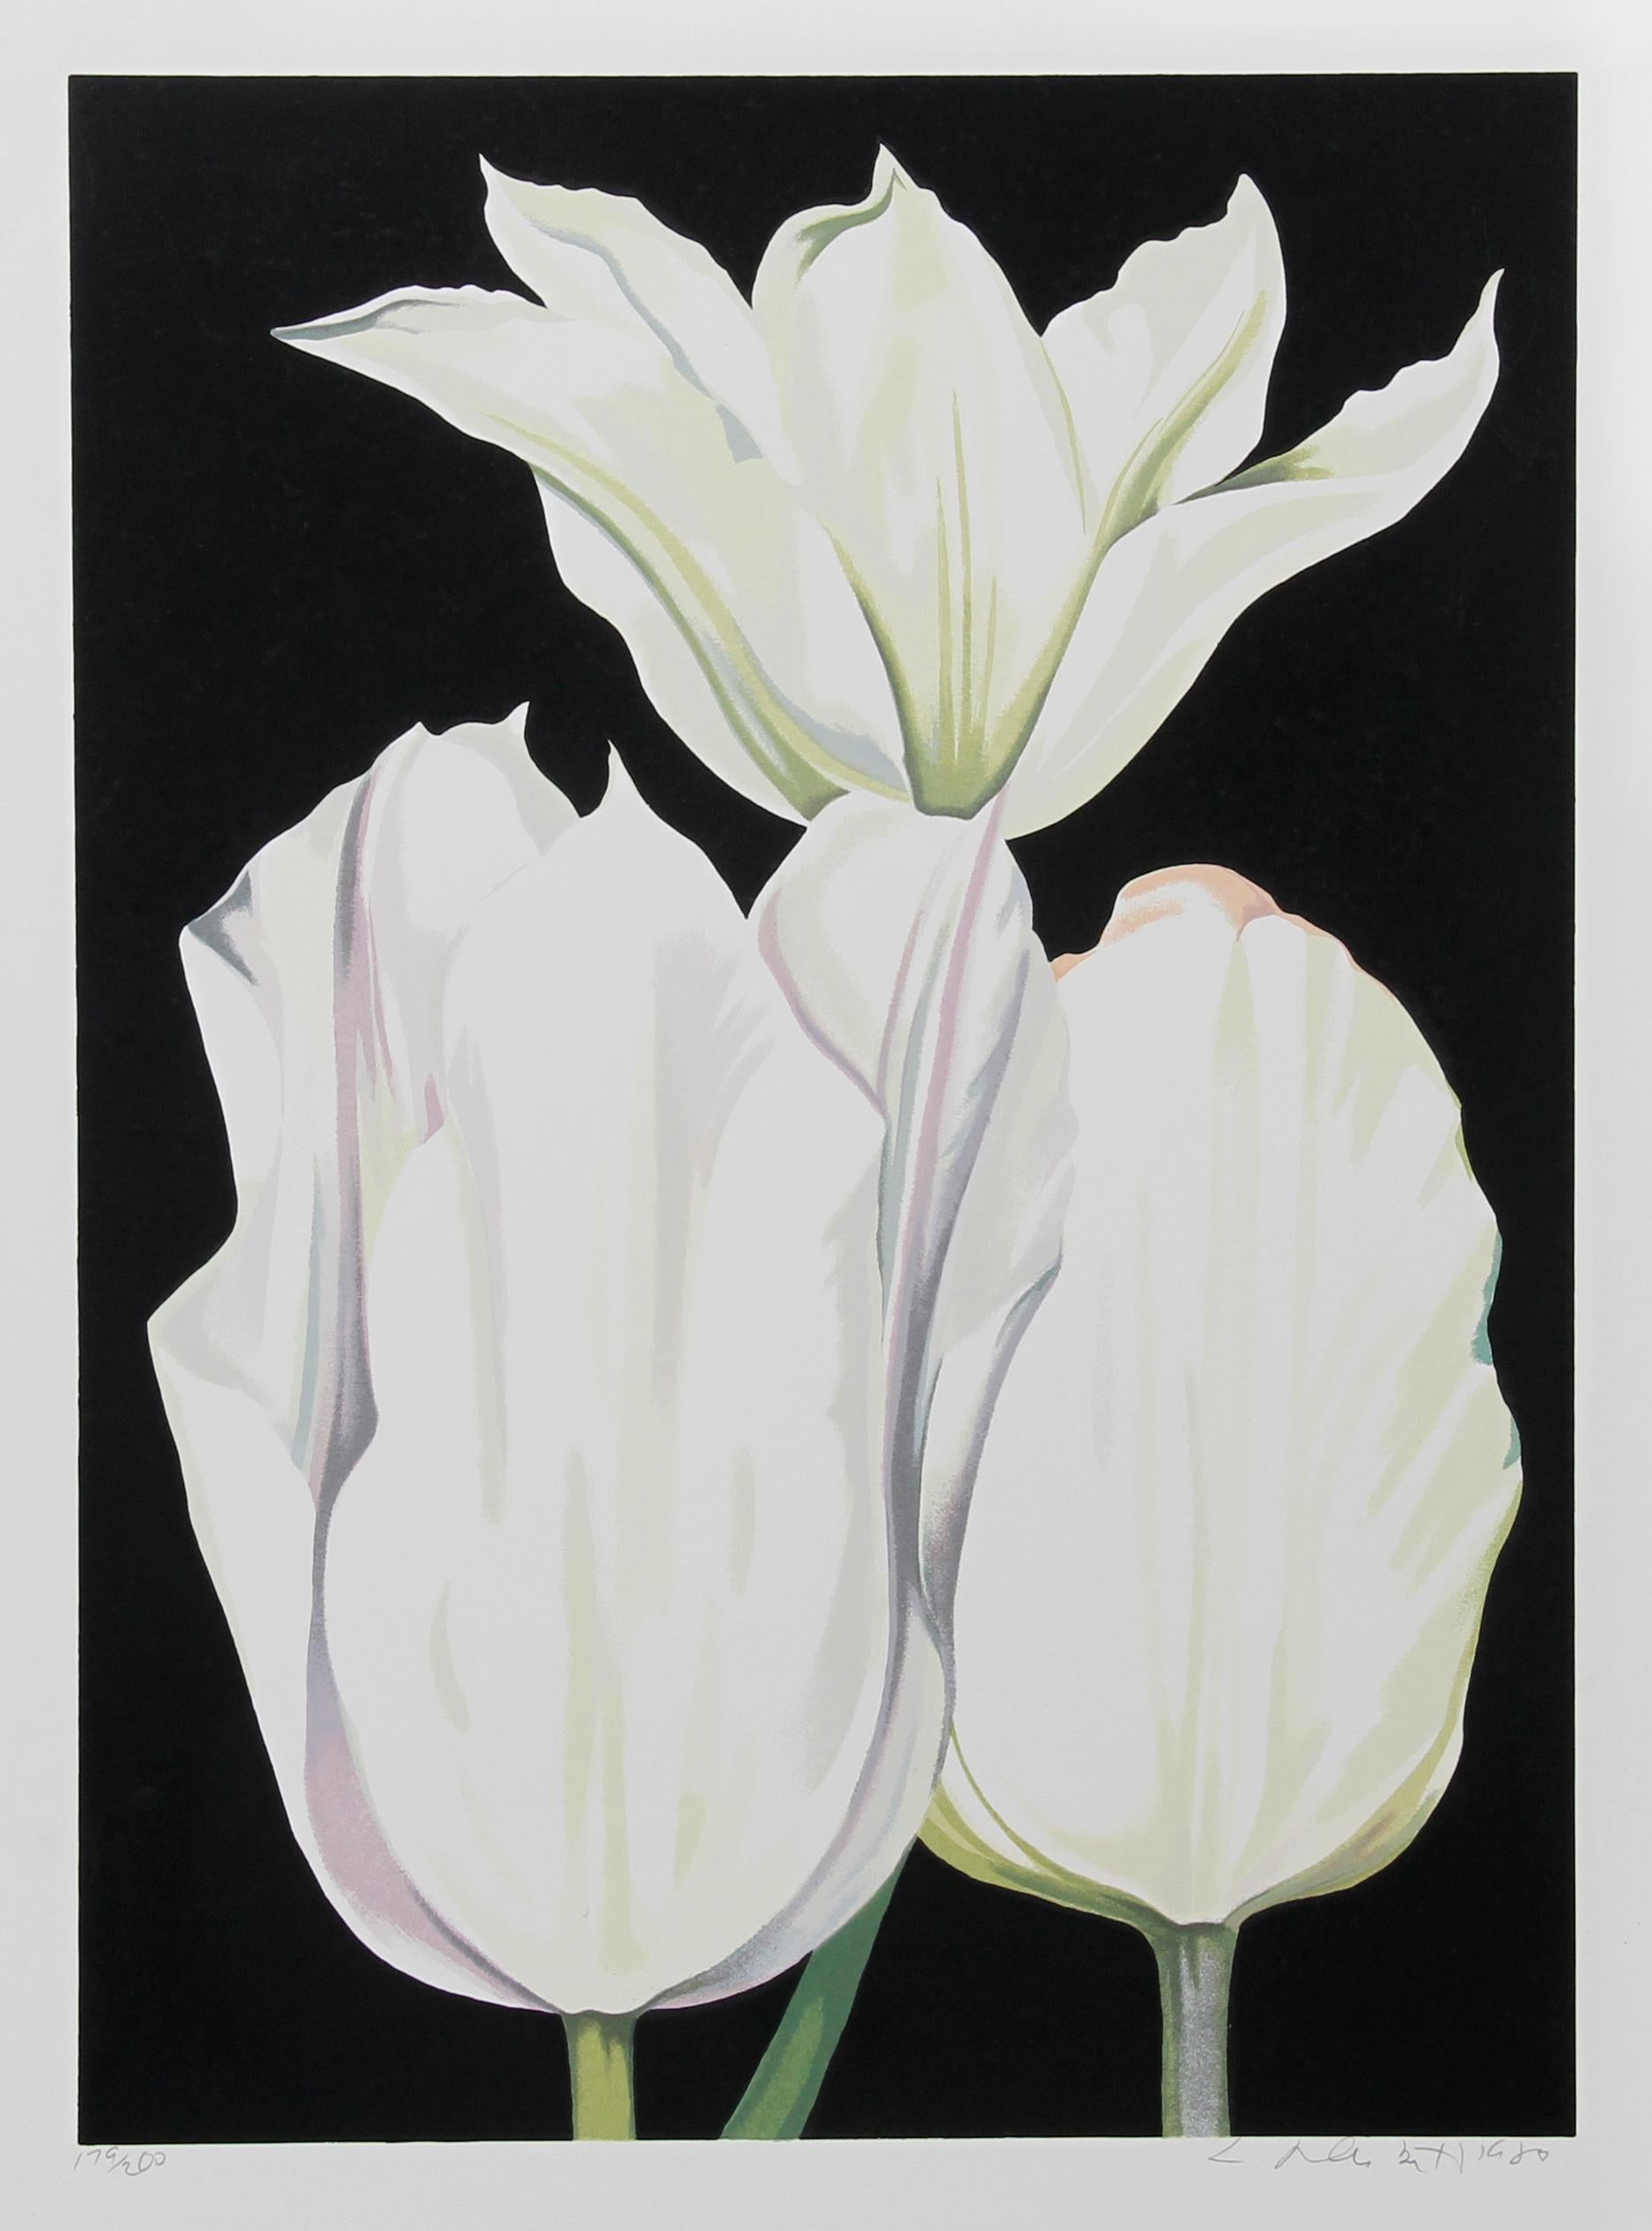 Artist: Lowell Blair Nesbitt, American (1933 - 1993)
Title: Three Tulips on Black
Year: 1980
Medium: Serigraph, signed and numbered in pencil
Edition: 200
Image Size: 28 x 20 inches
Size: 35 in. x 26 in. (88.9 cm x 66.04 cm)